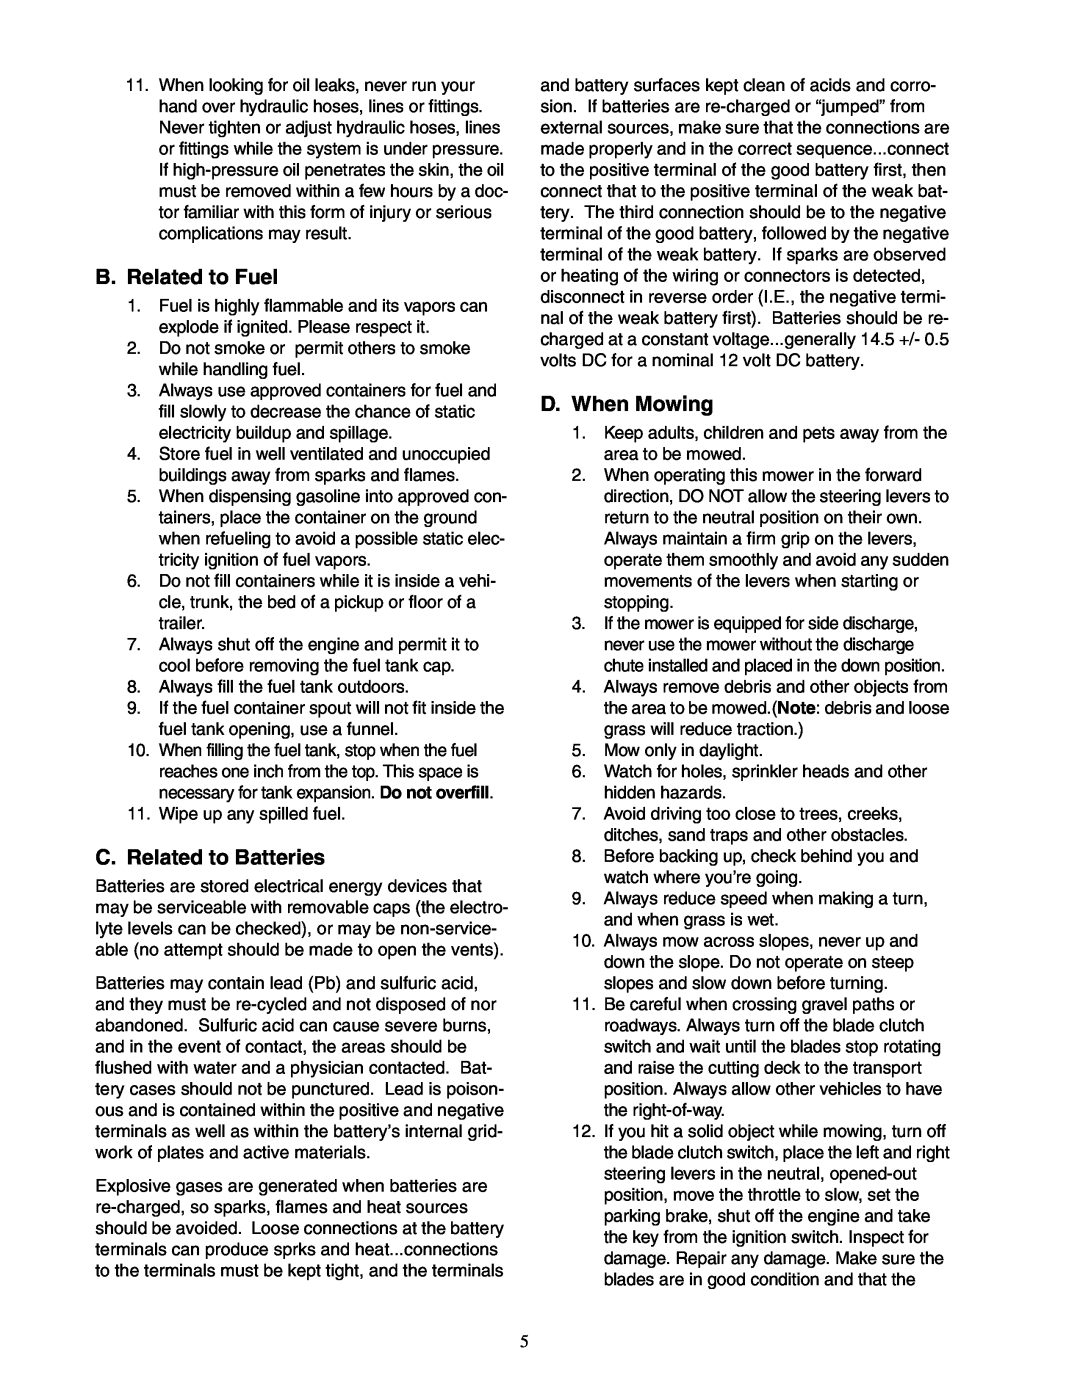 Cub Cadet 48-inch, 54-inch, 60-inch, 72-inch service manual B.Related to Fuel, C. Related to Batteries, D.When Mowing 